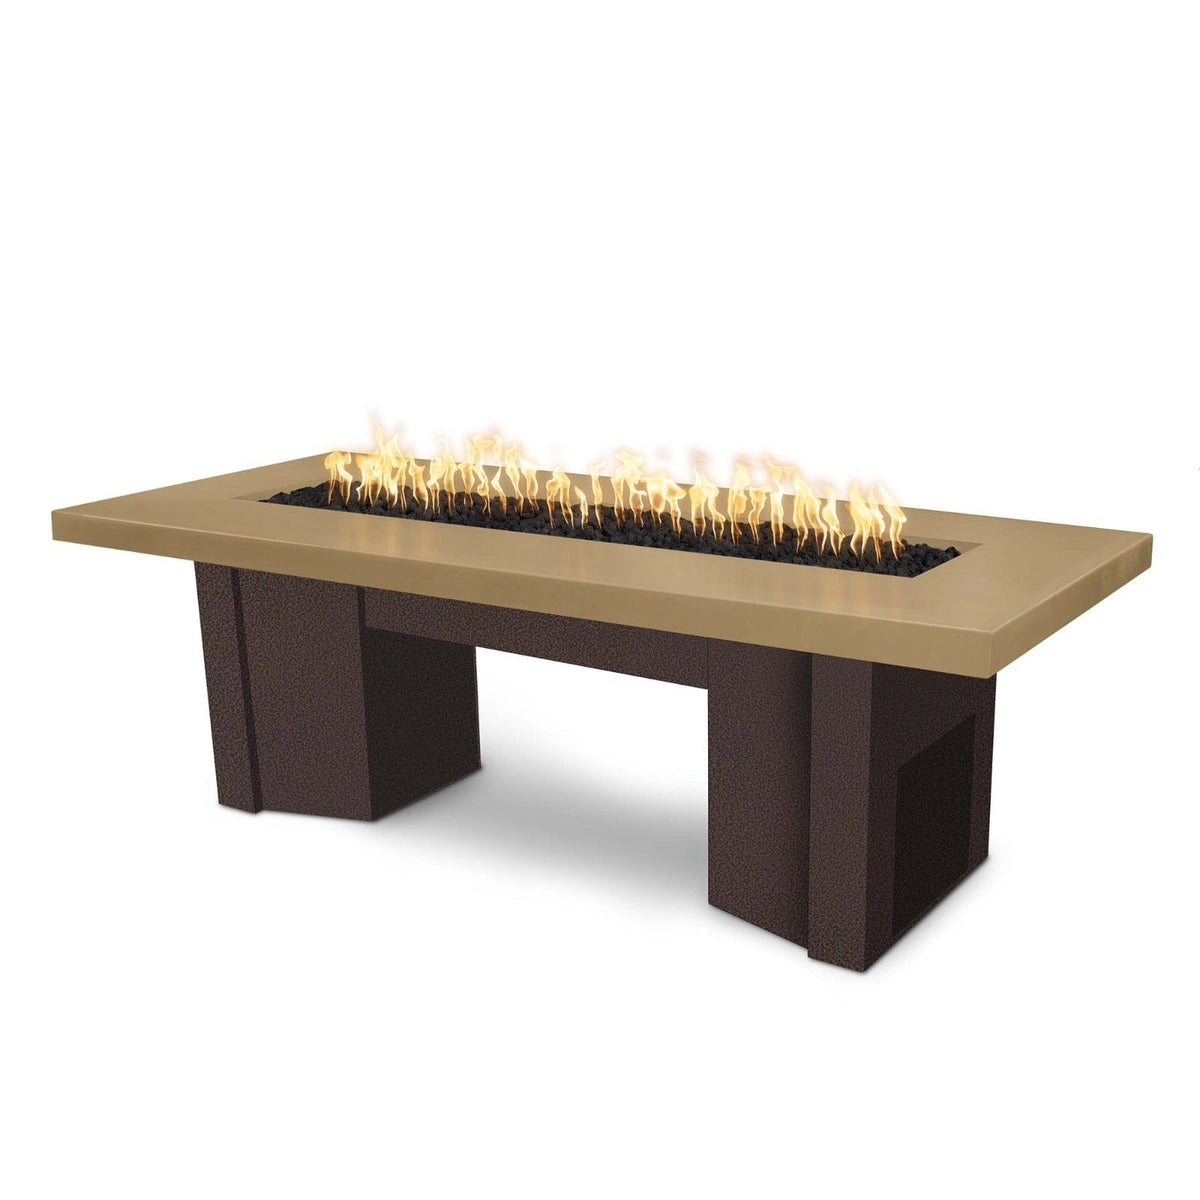 The Outdoor Plus Fire Features Brown (-BRN) / Copper Vein Powder Coated Steel (-CPV) The Outdoor Plus 78&quot; Alameda Fire Table Smooth Concrete in Liquid Propane - Match Lit with Flame Sense System / OPT-ALMGFRC78FSML-LP